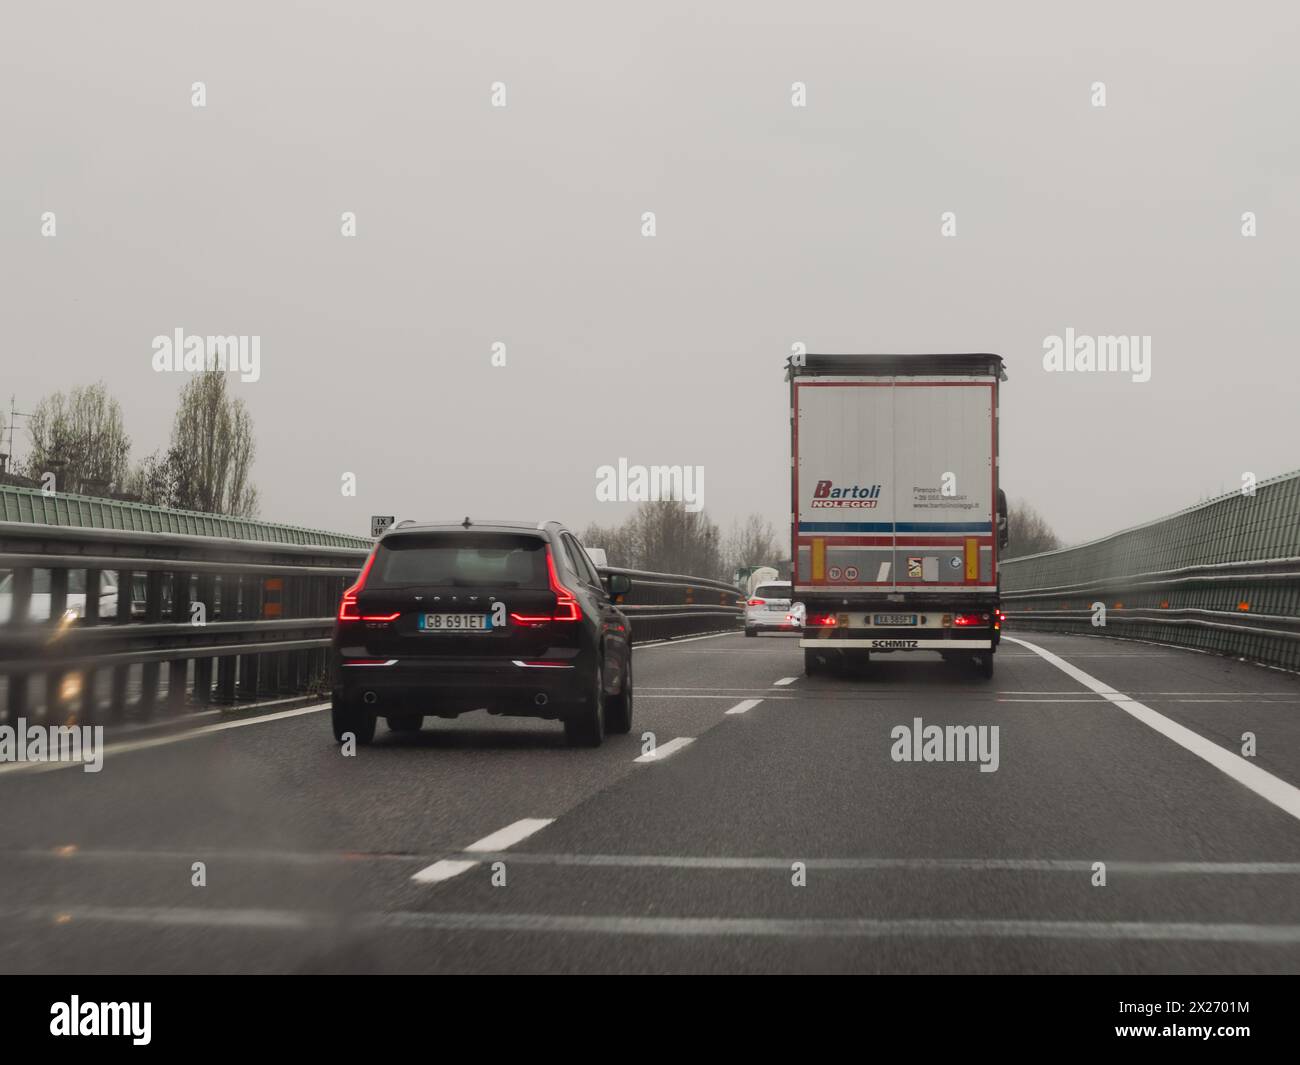 Milan, Italy - April 26th 2023 on the road on a highway under cloudy conditions, A1 A8 highway near Milan, Italy Stock Photo